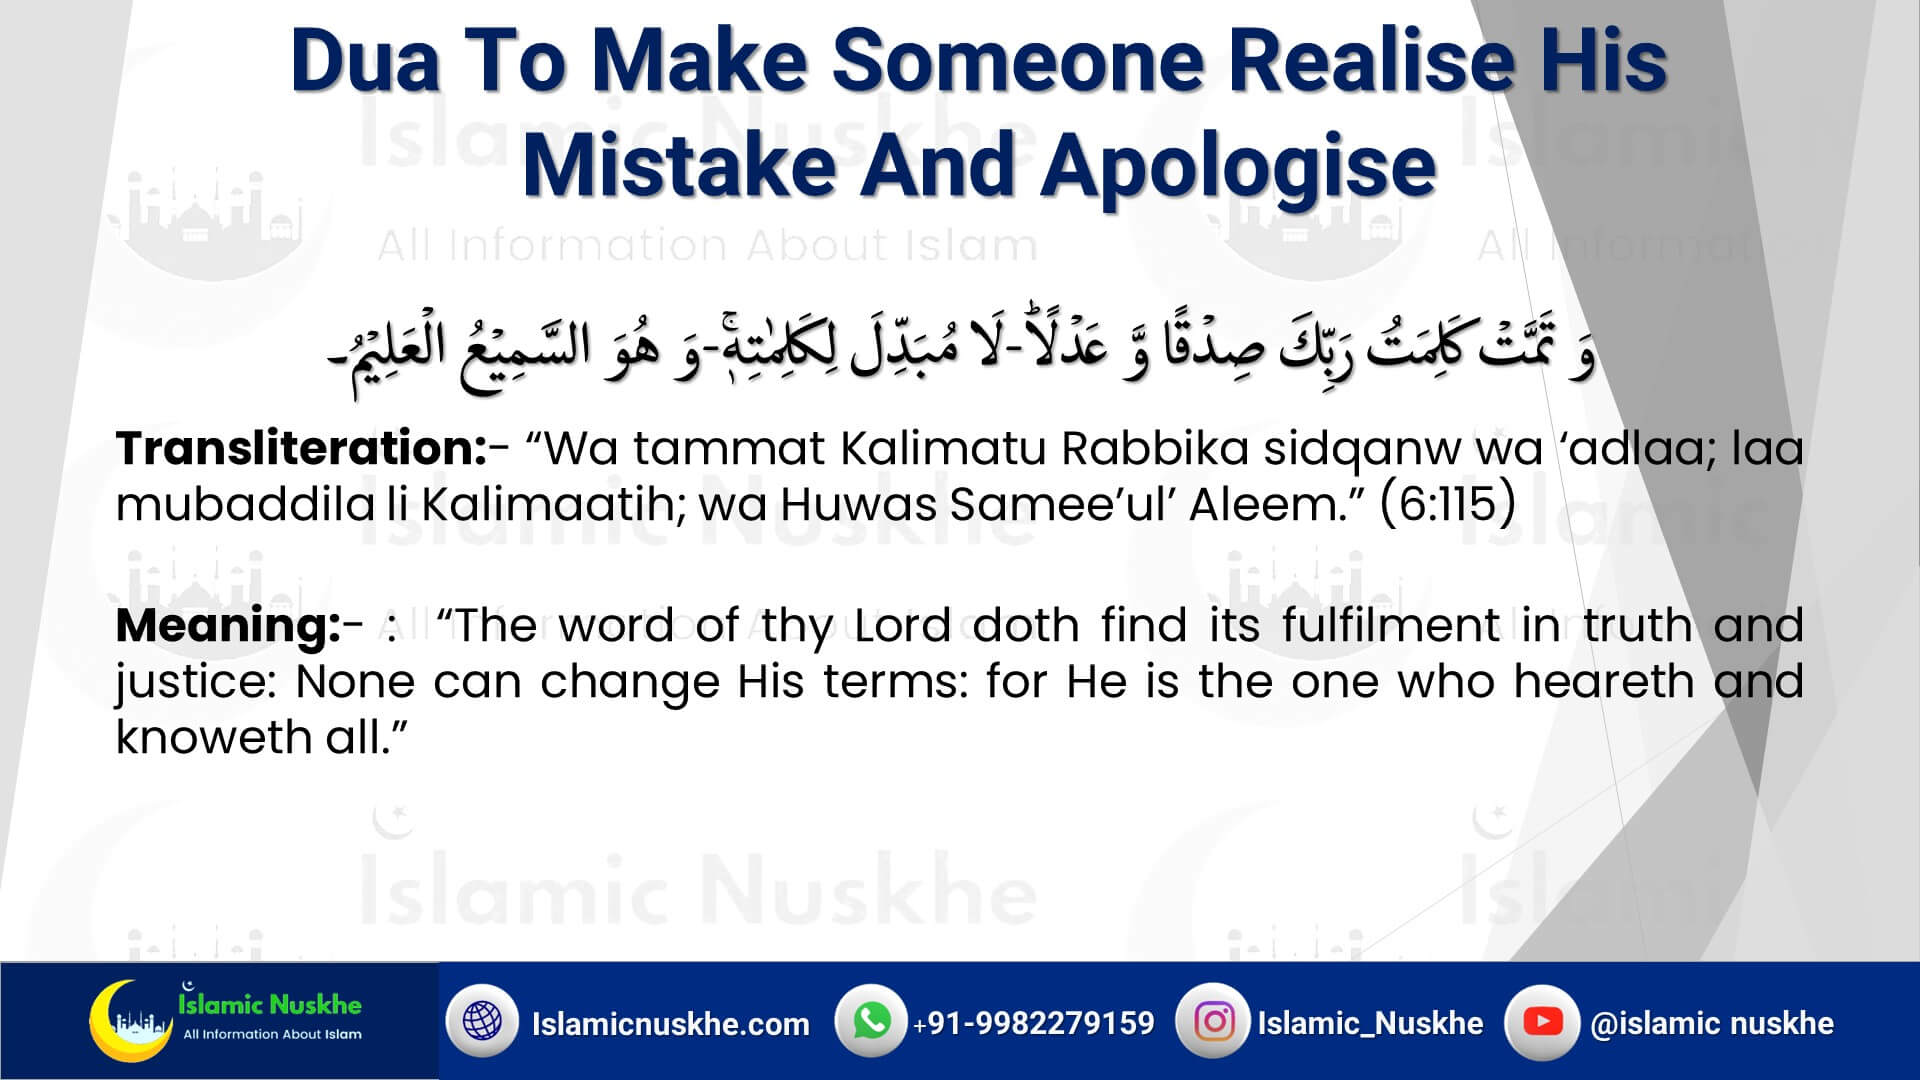 Dua To Make Someone Realise His Mistake And Apologise